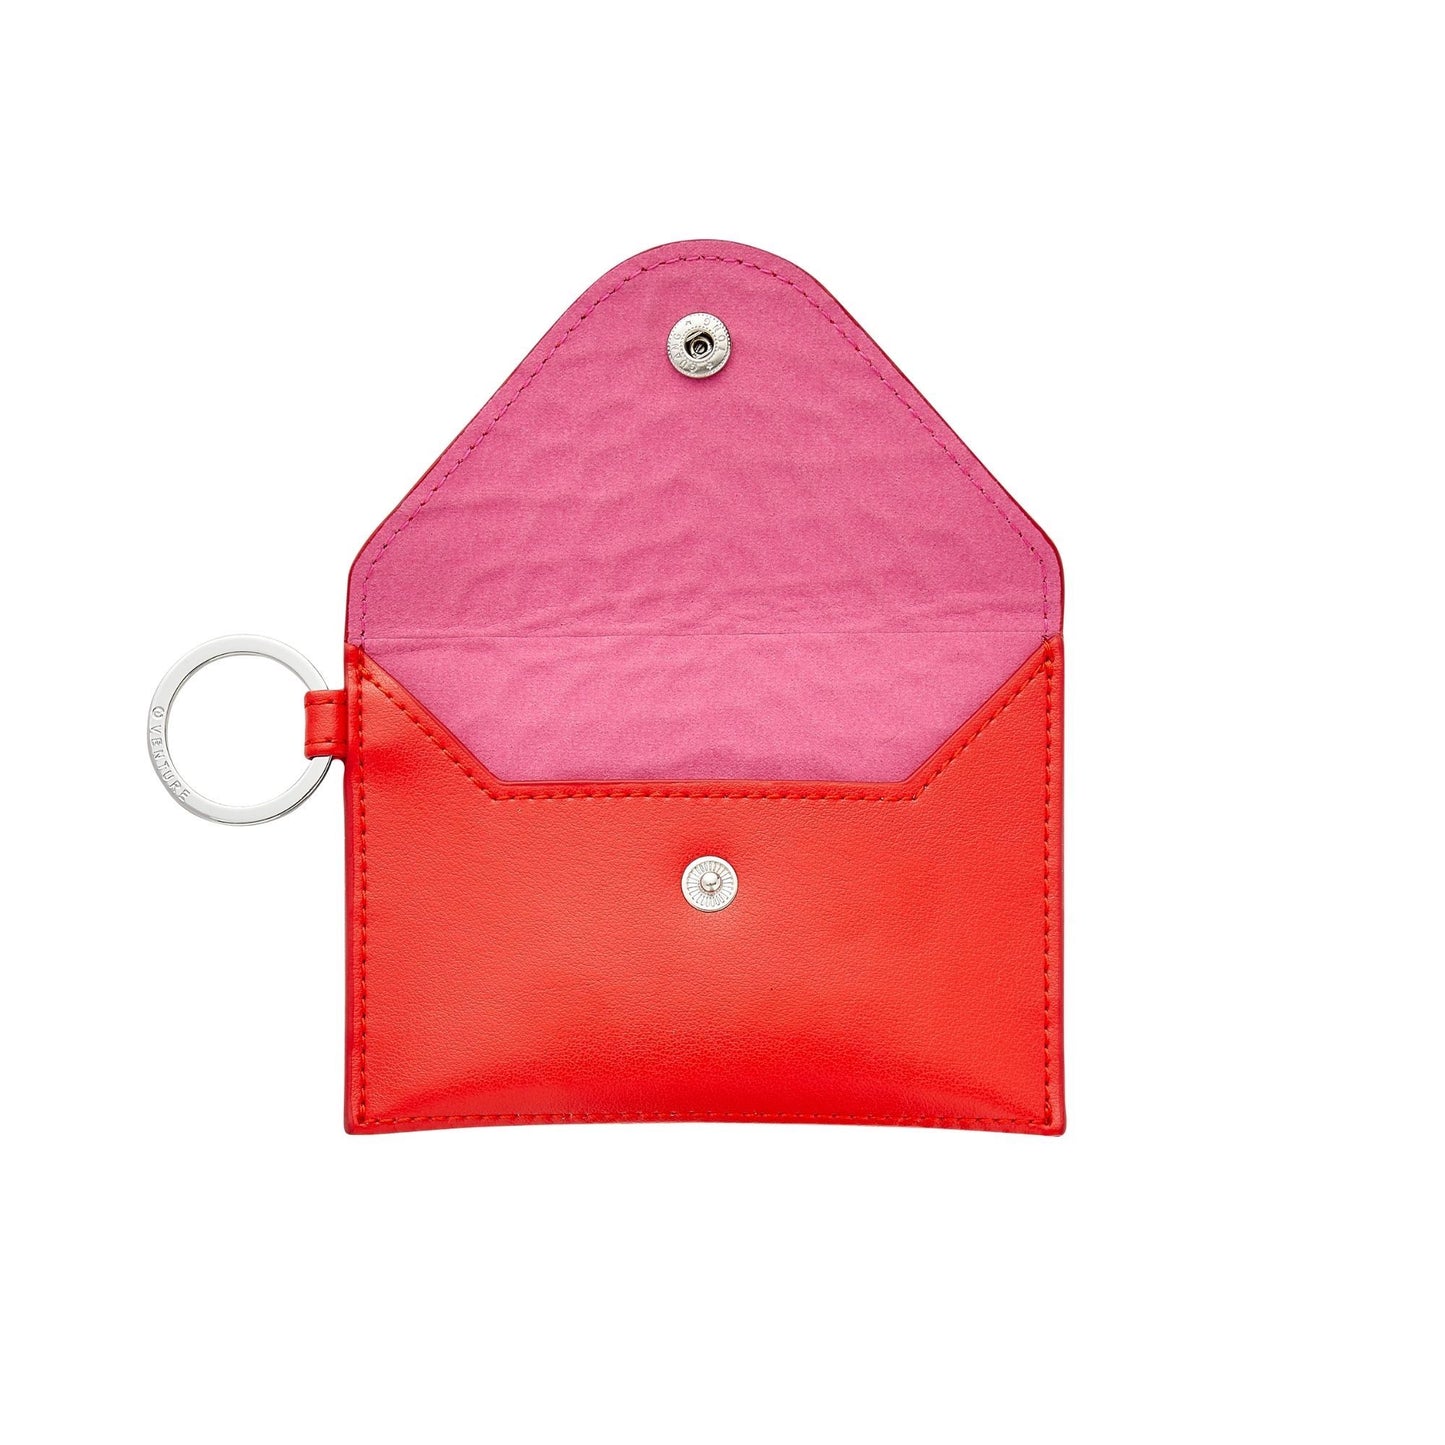 Stylish leather keychain wallet in mini envelope design with hot pink microfiber liner shown inside